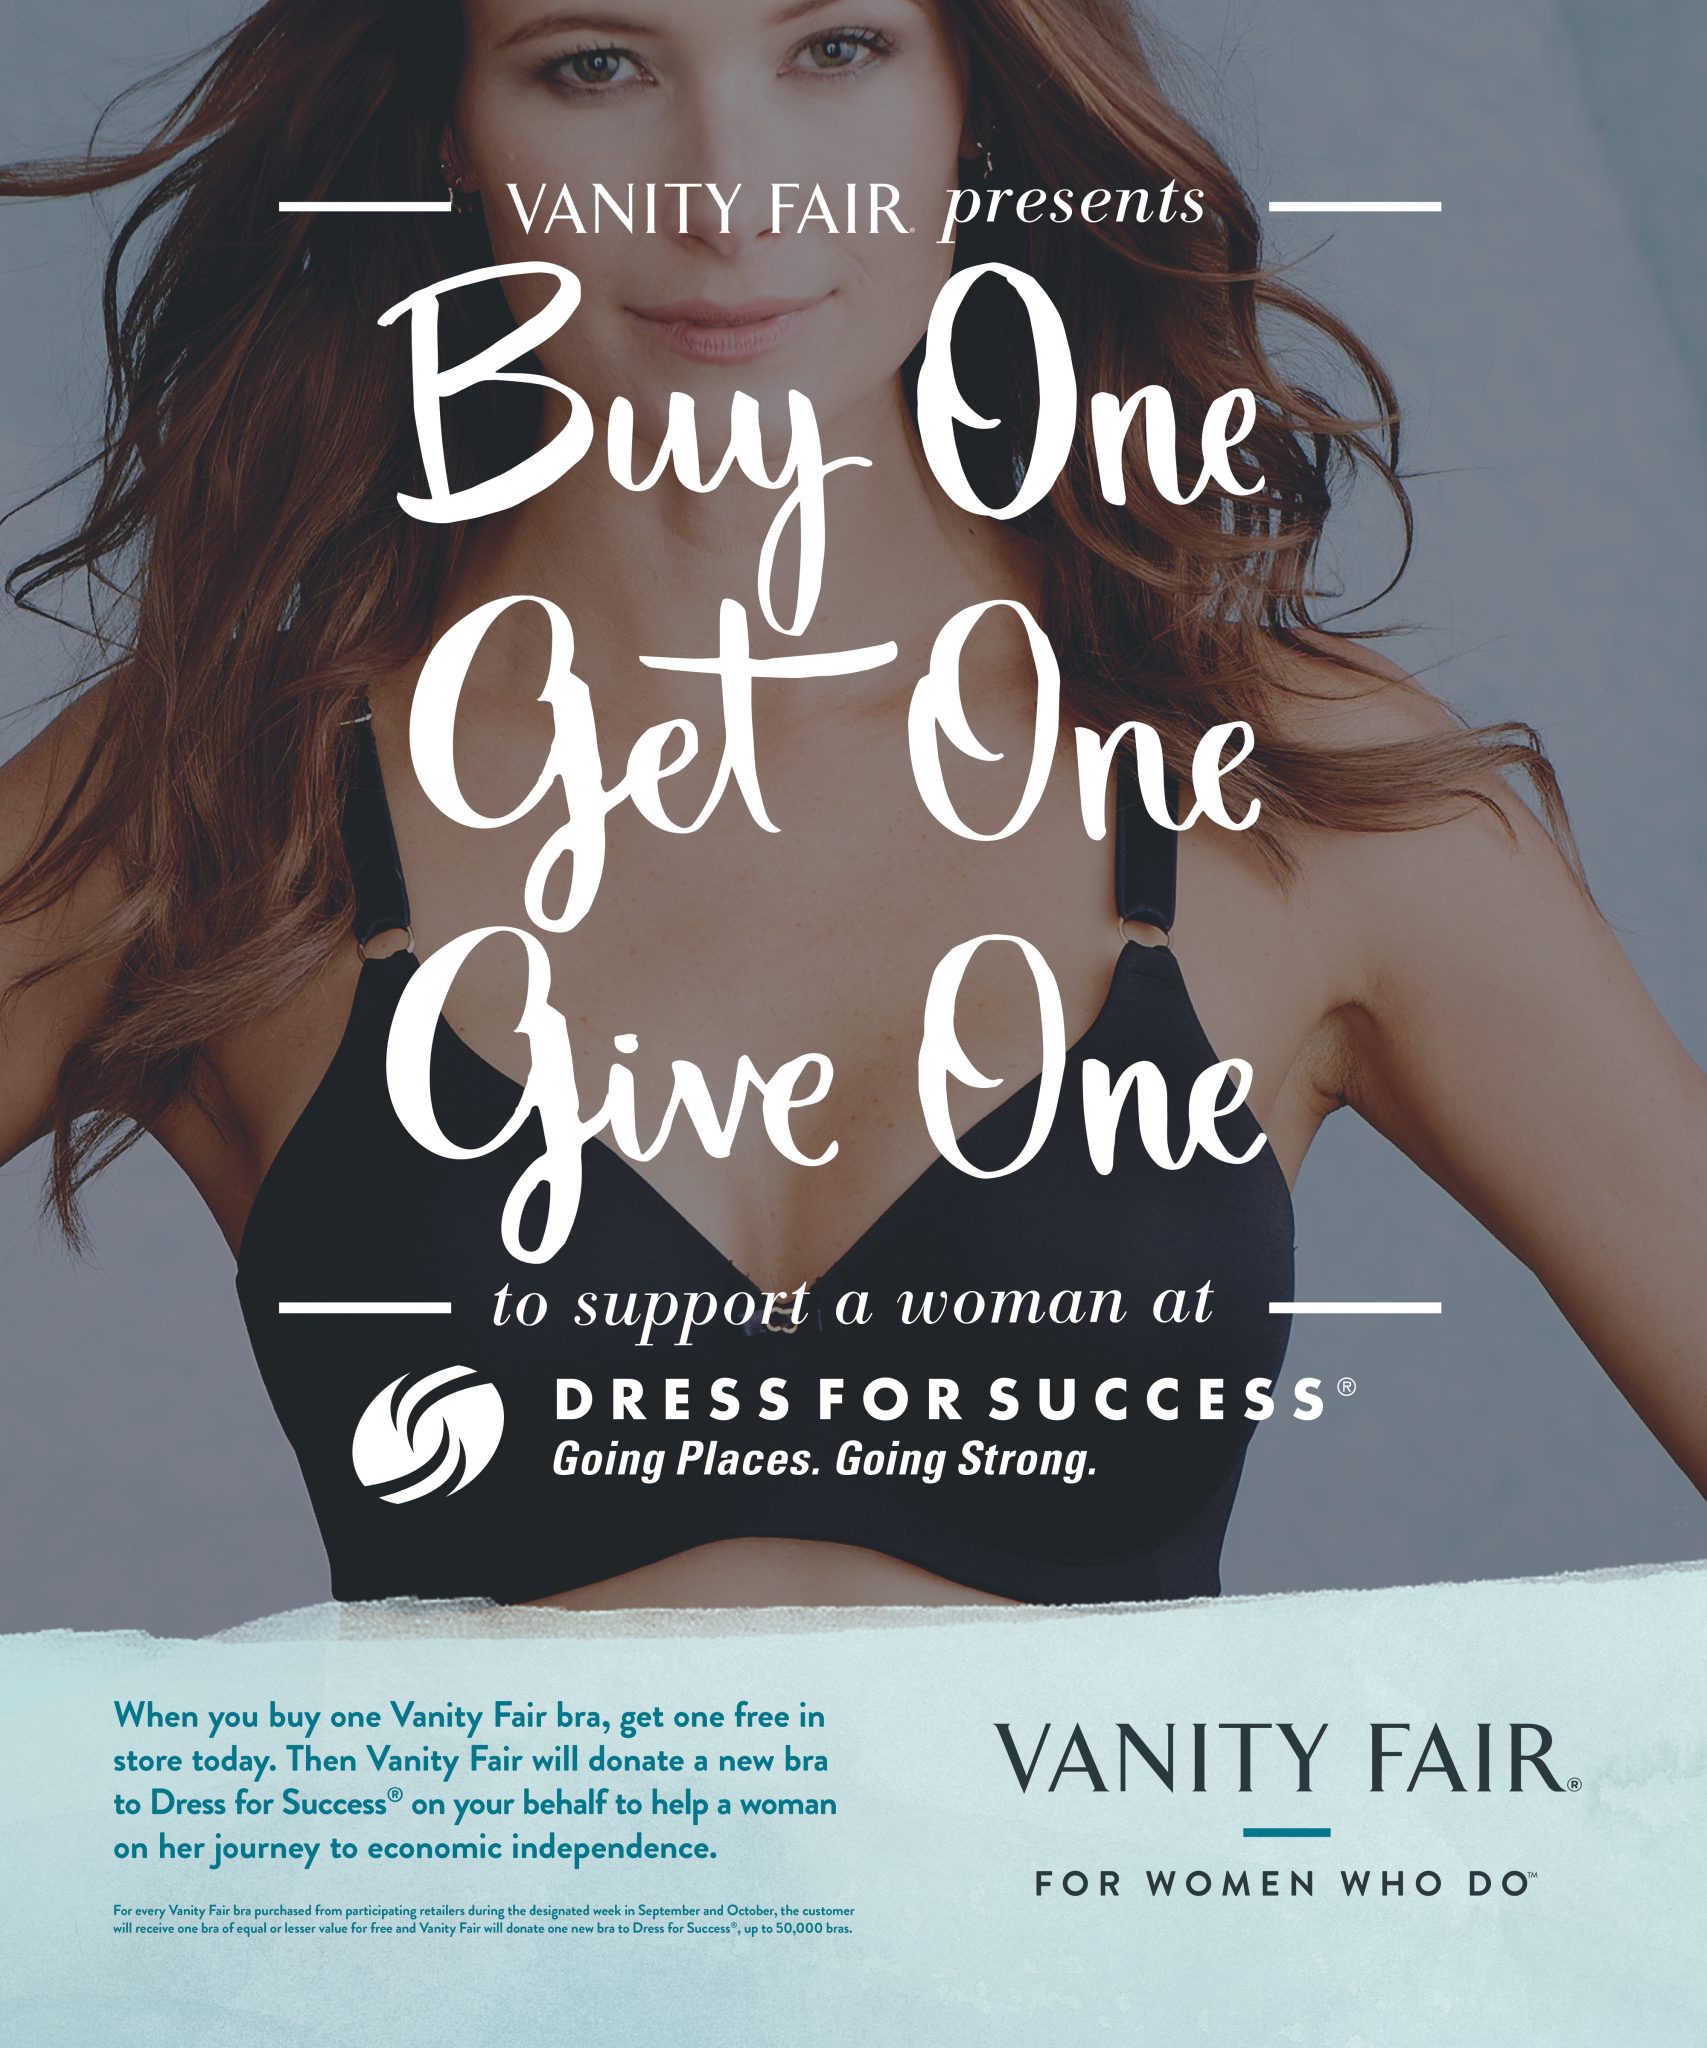 Vanity Fair Presents…Buy One, Get One, Give One